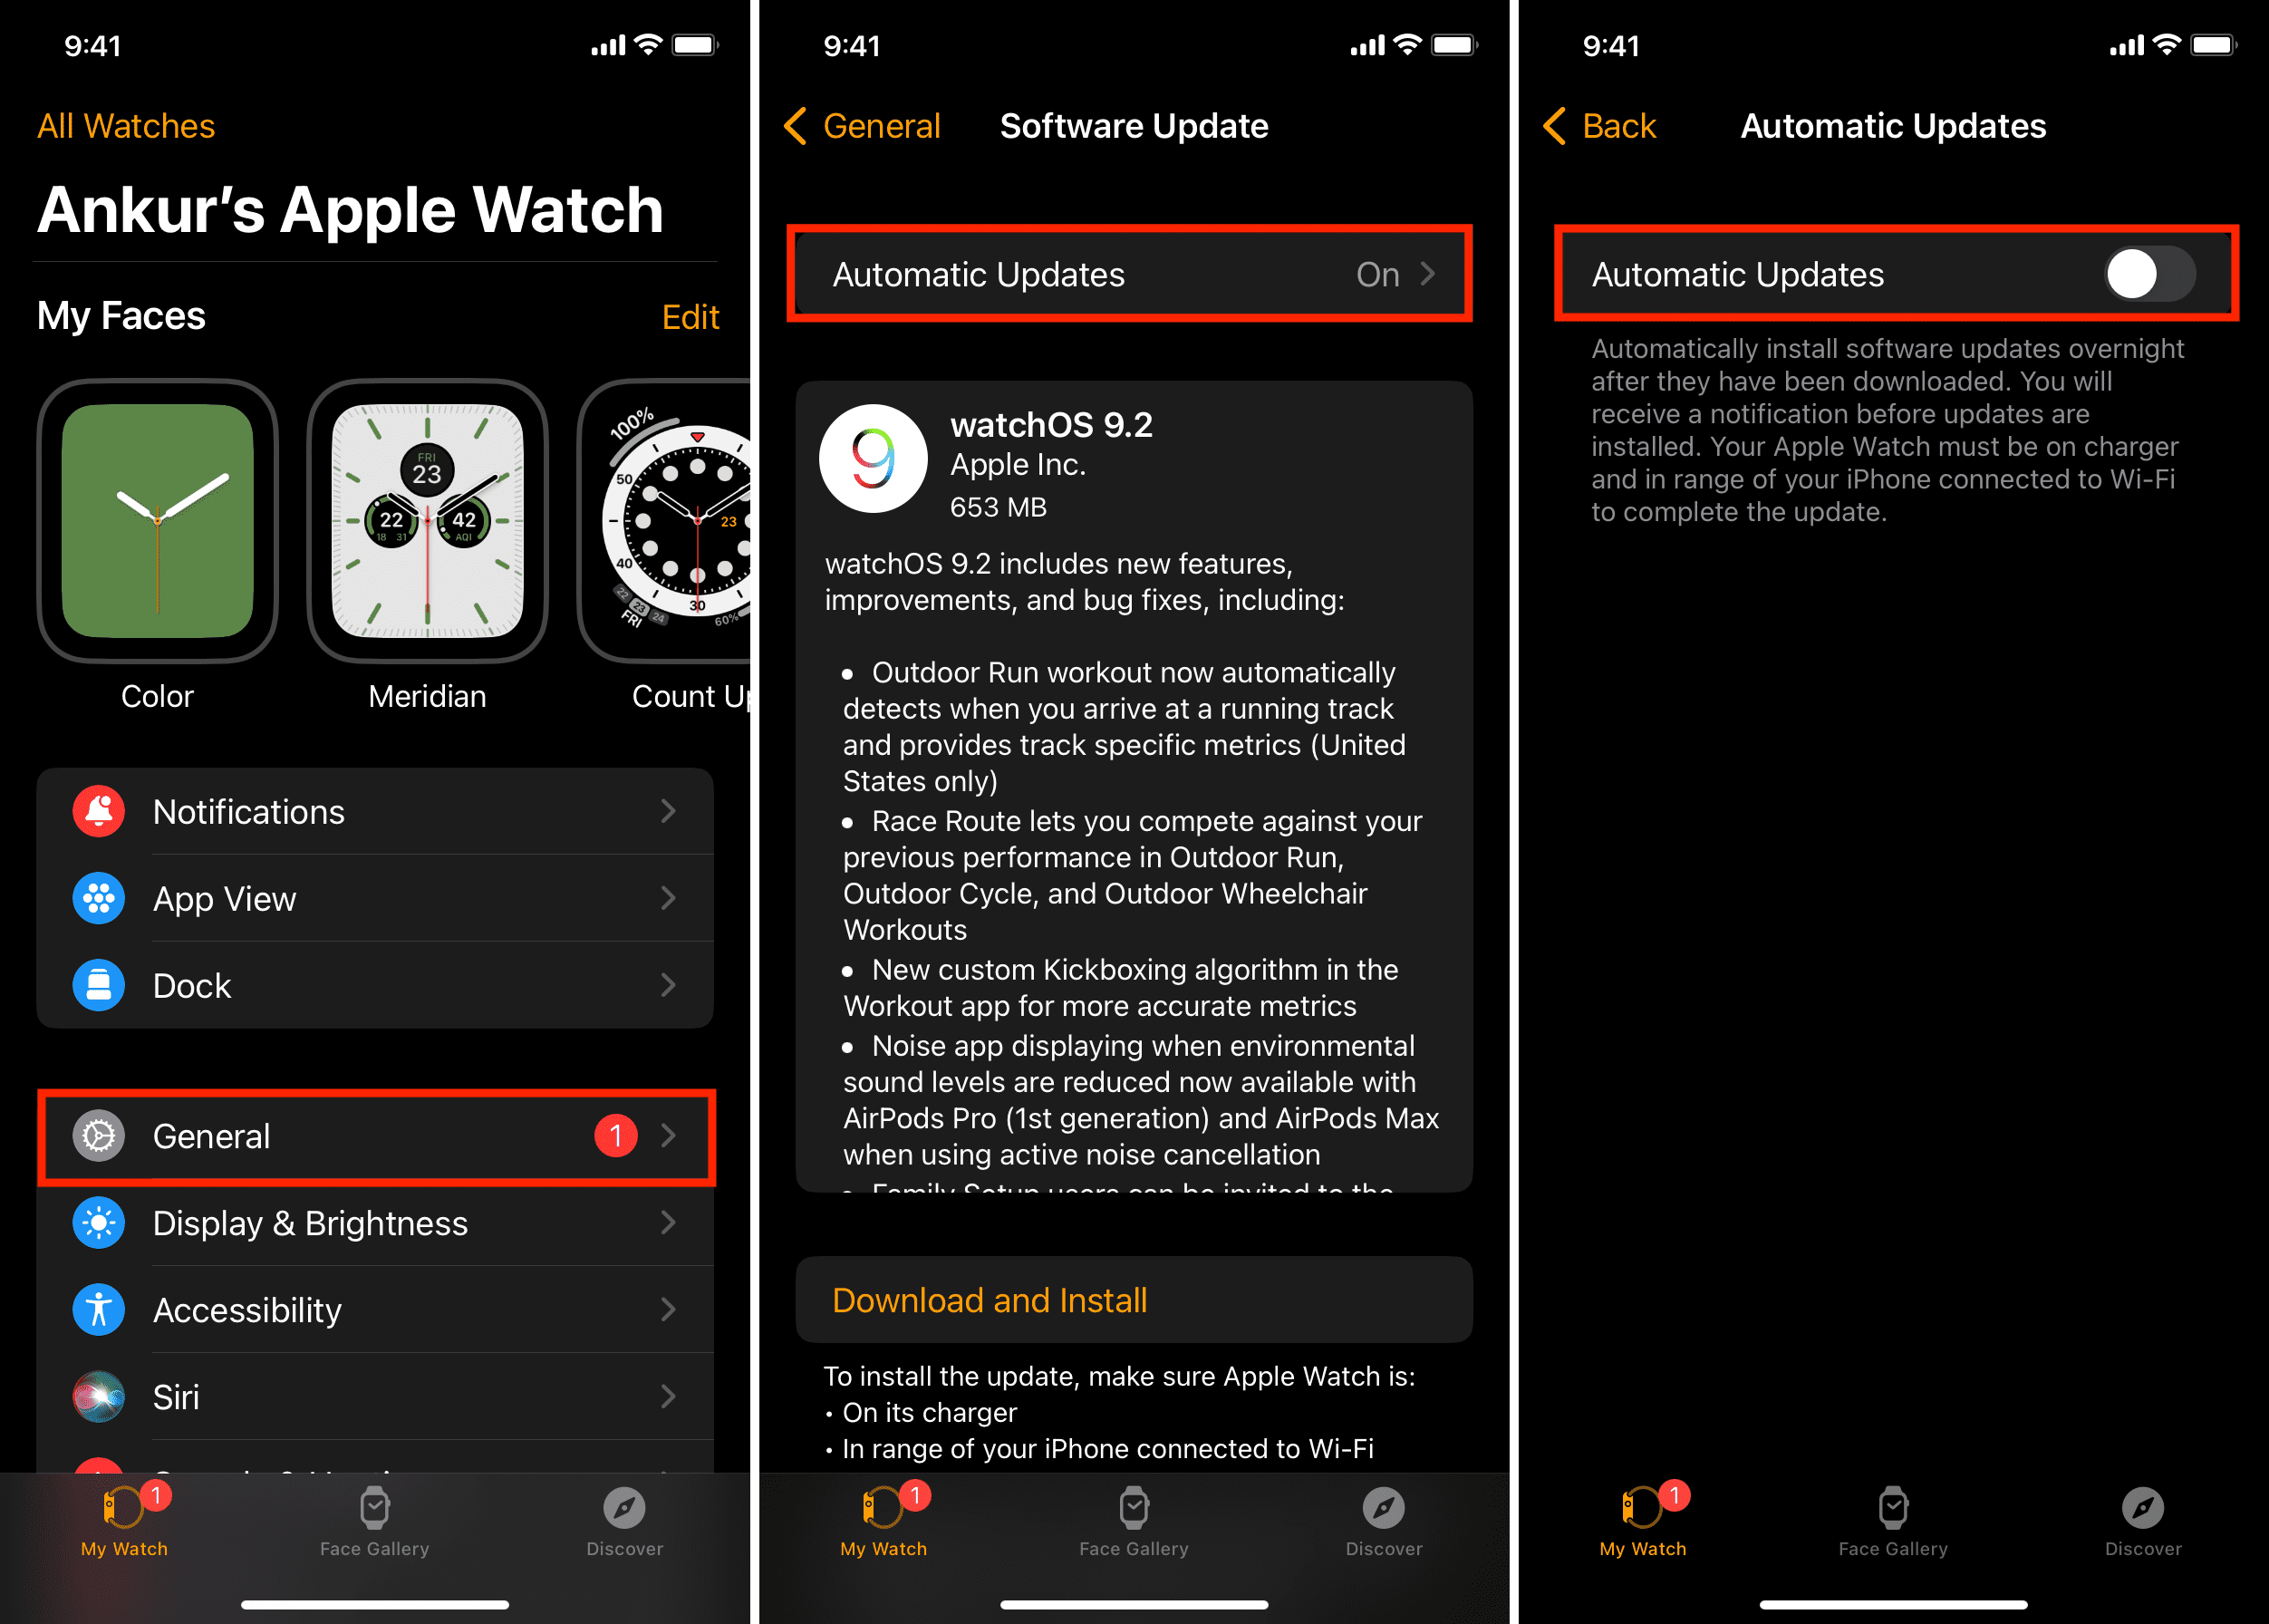 Switch off automatic software update on Apple Watch from the iOS Watch app